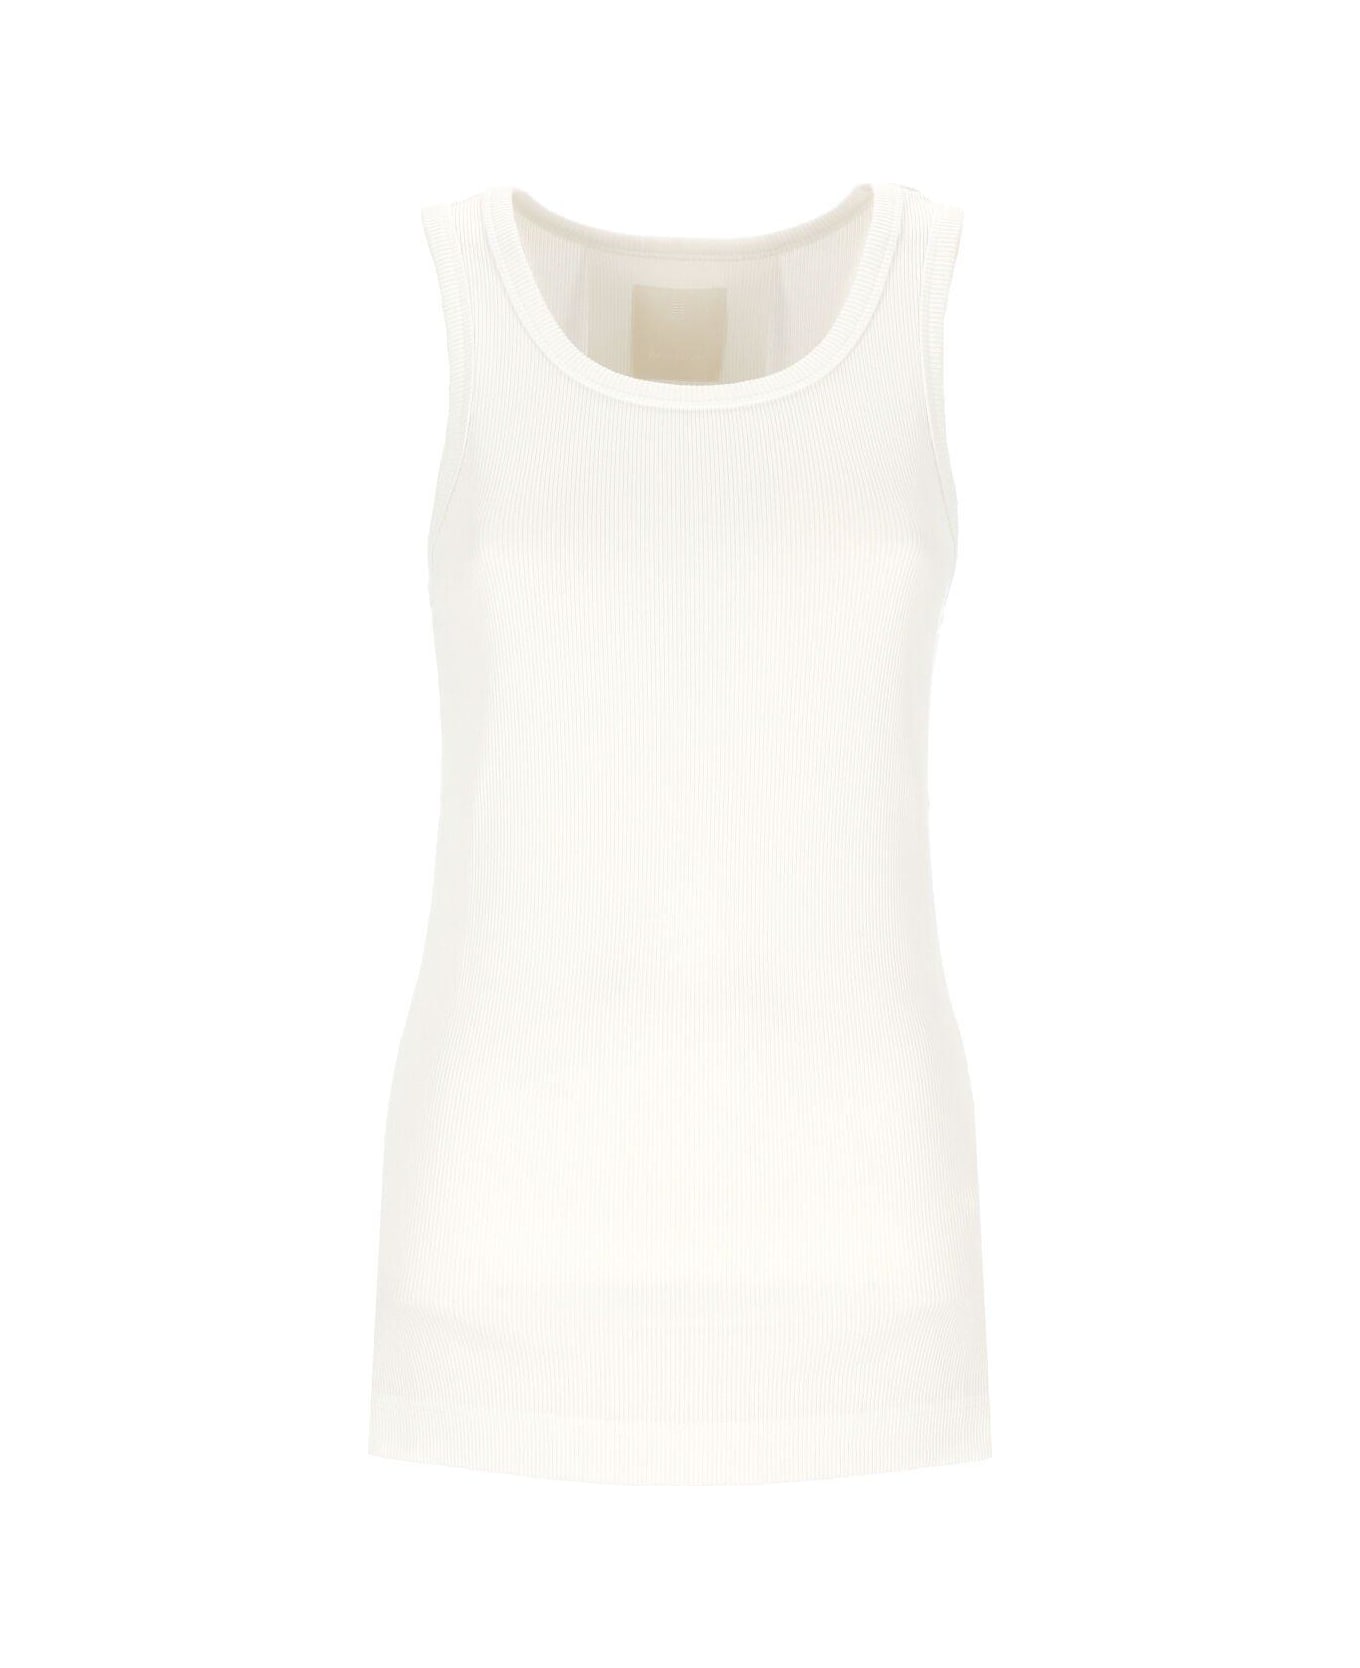 Givenchy Extra Slim Fit Tank Top - WHITE